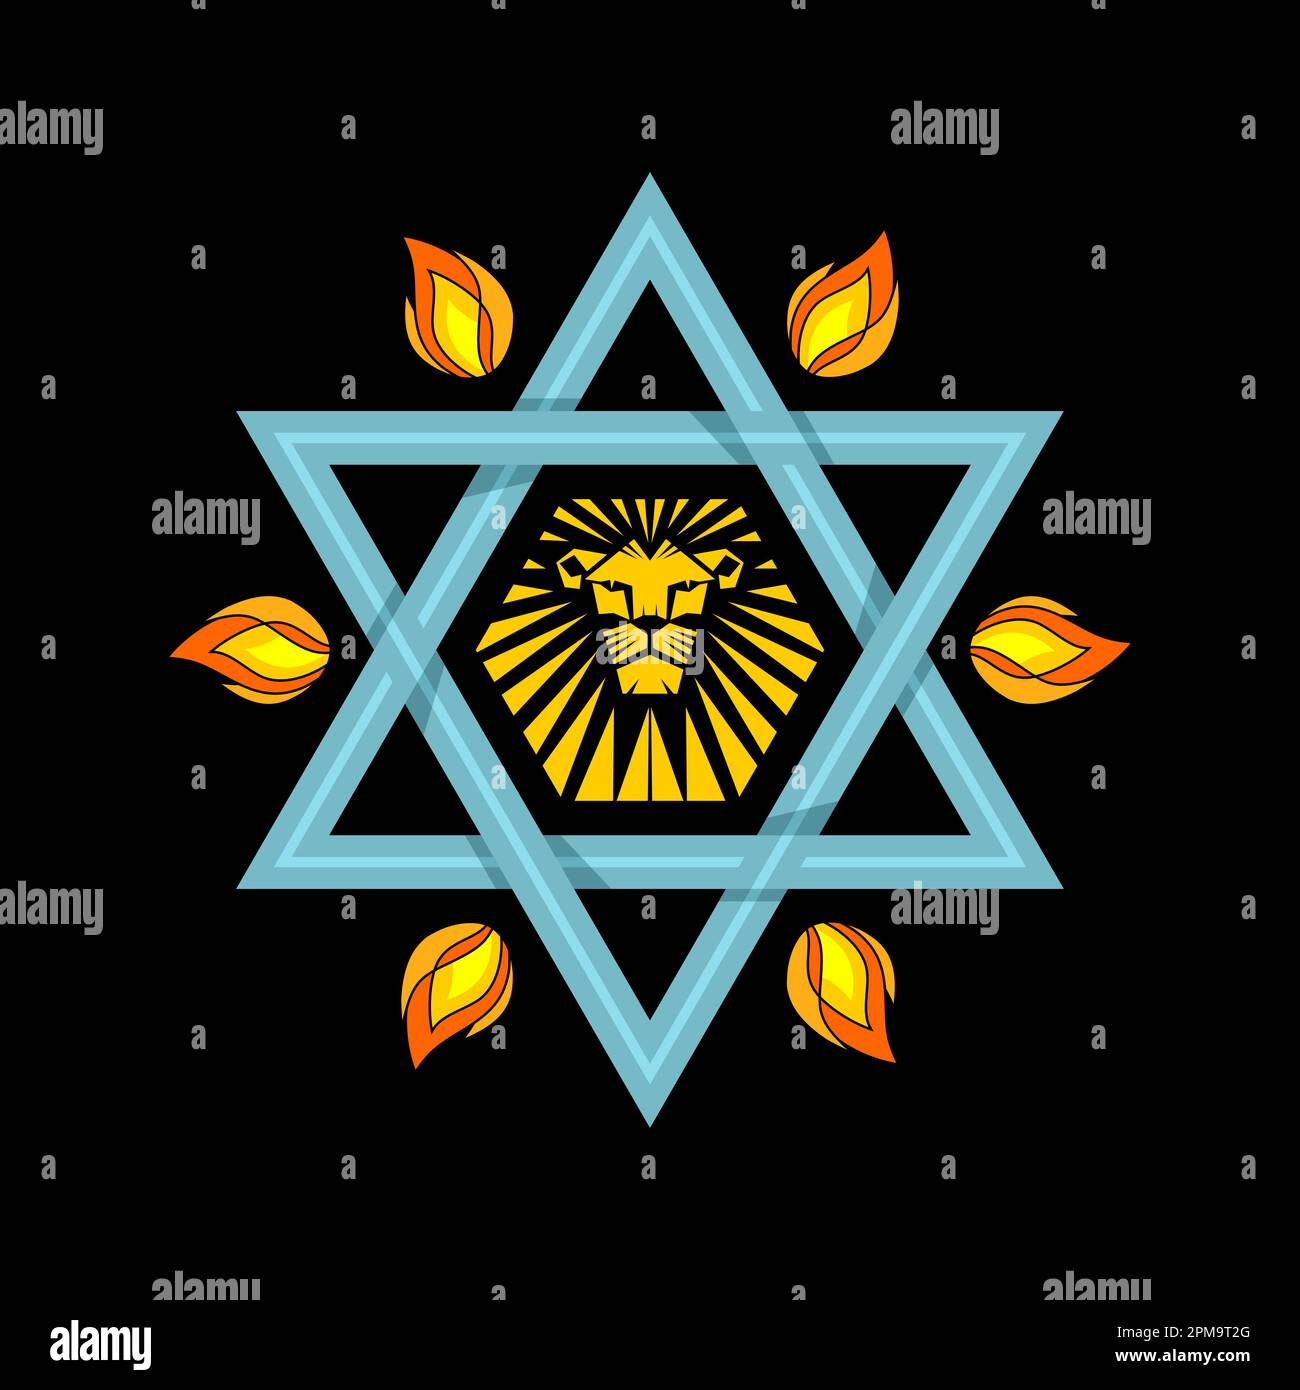 Vector illustration of the Jewish Star of David symbol combined with decorative design elements. Stock Vector